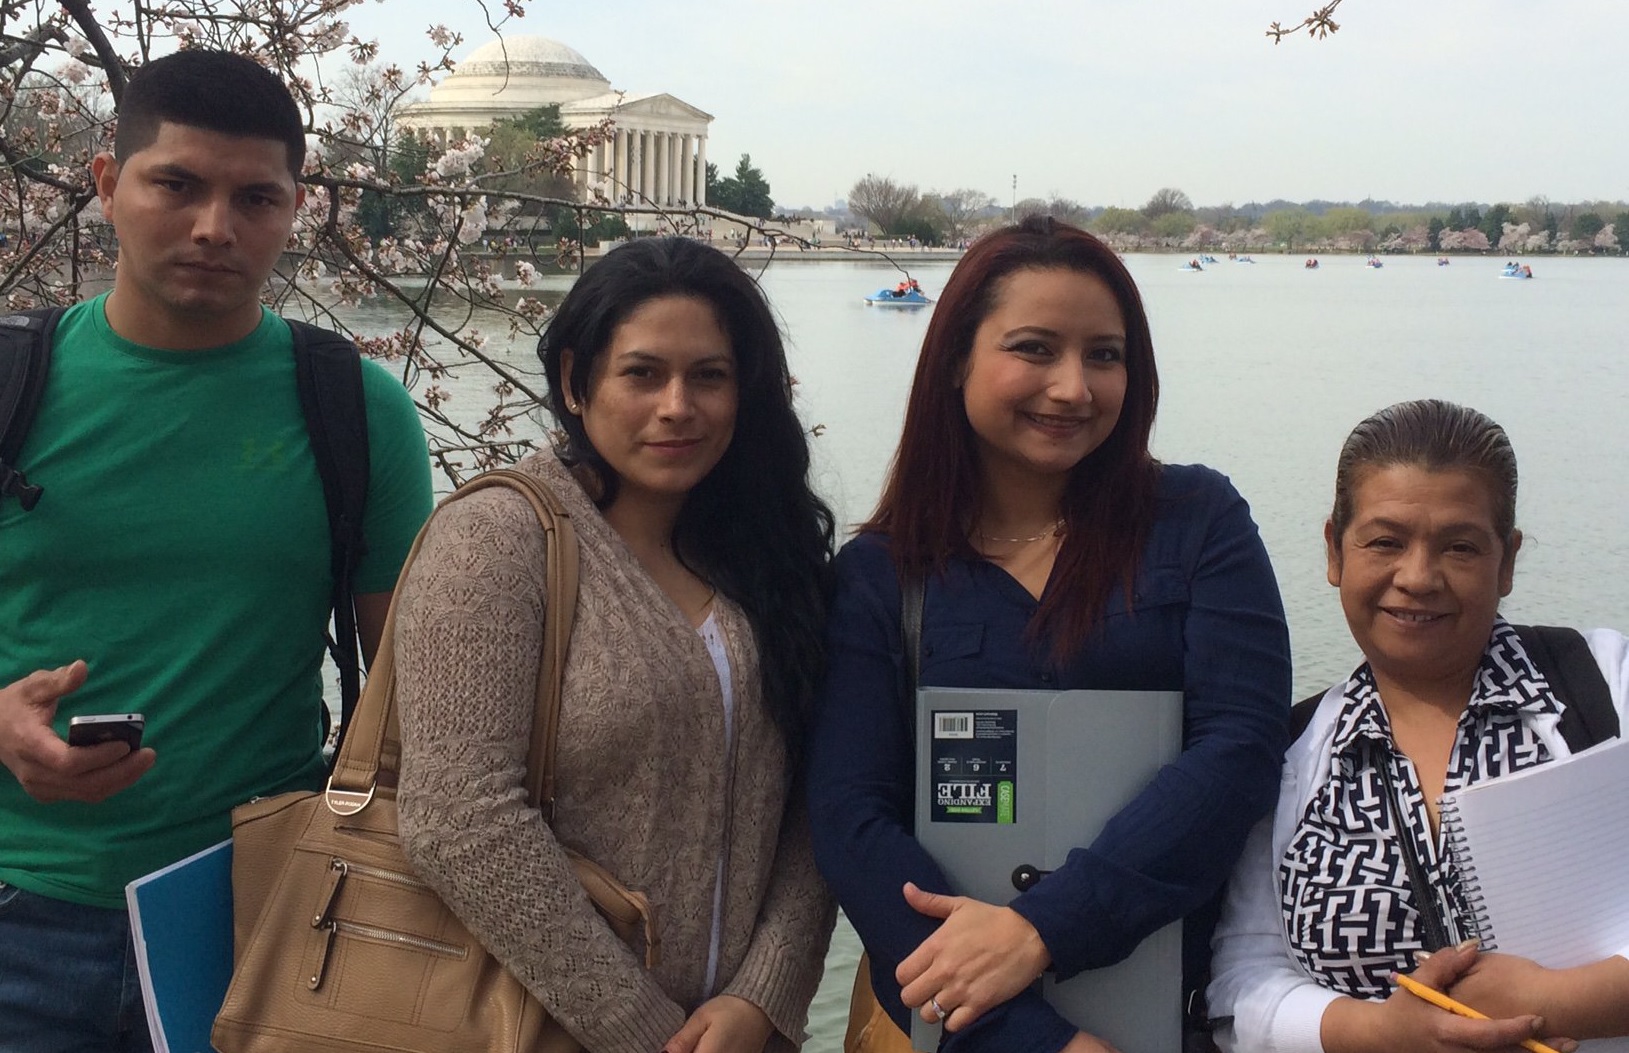 students in front of Jefferson Memorial in Washington DC